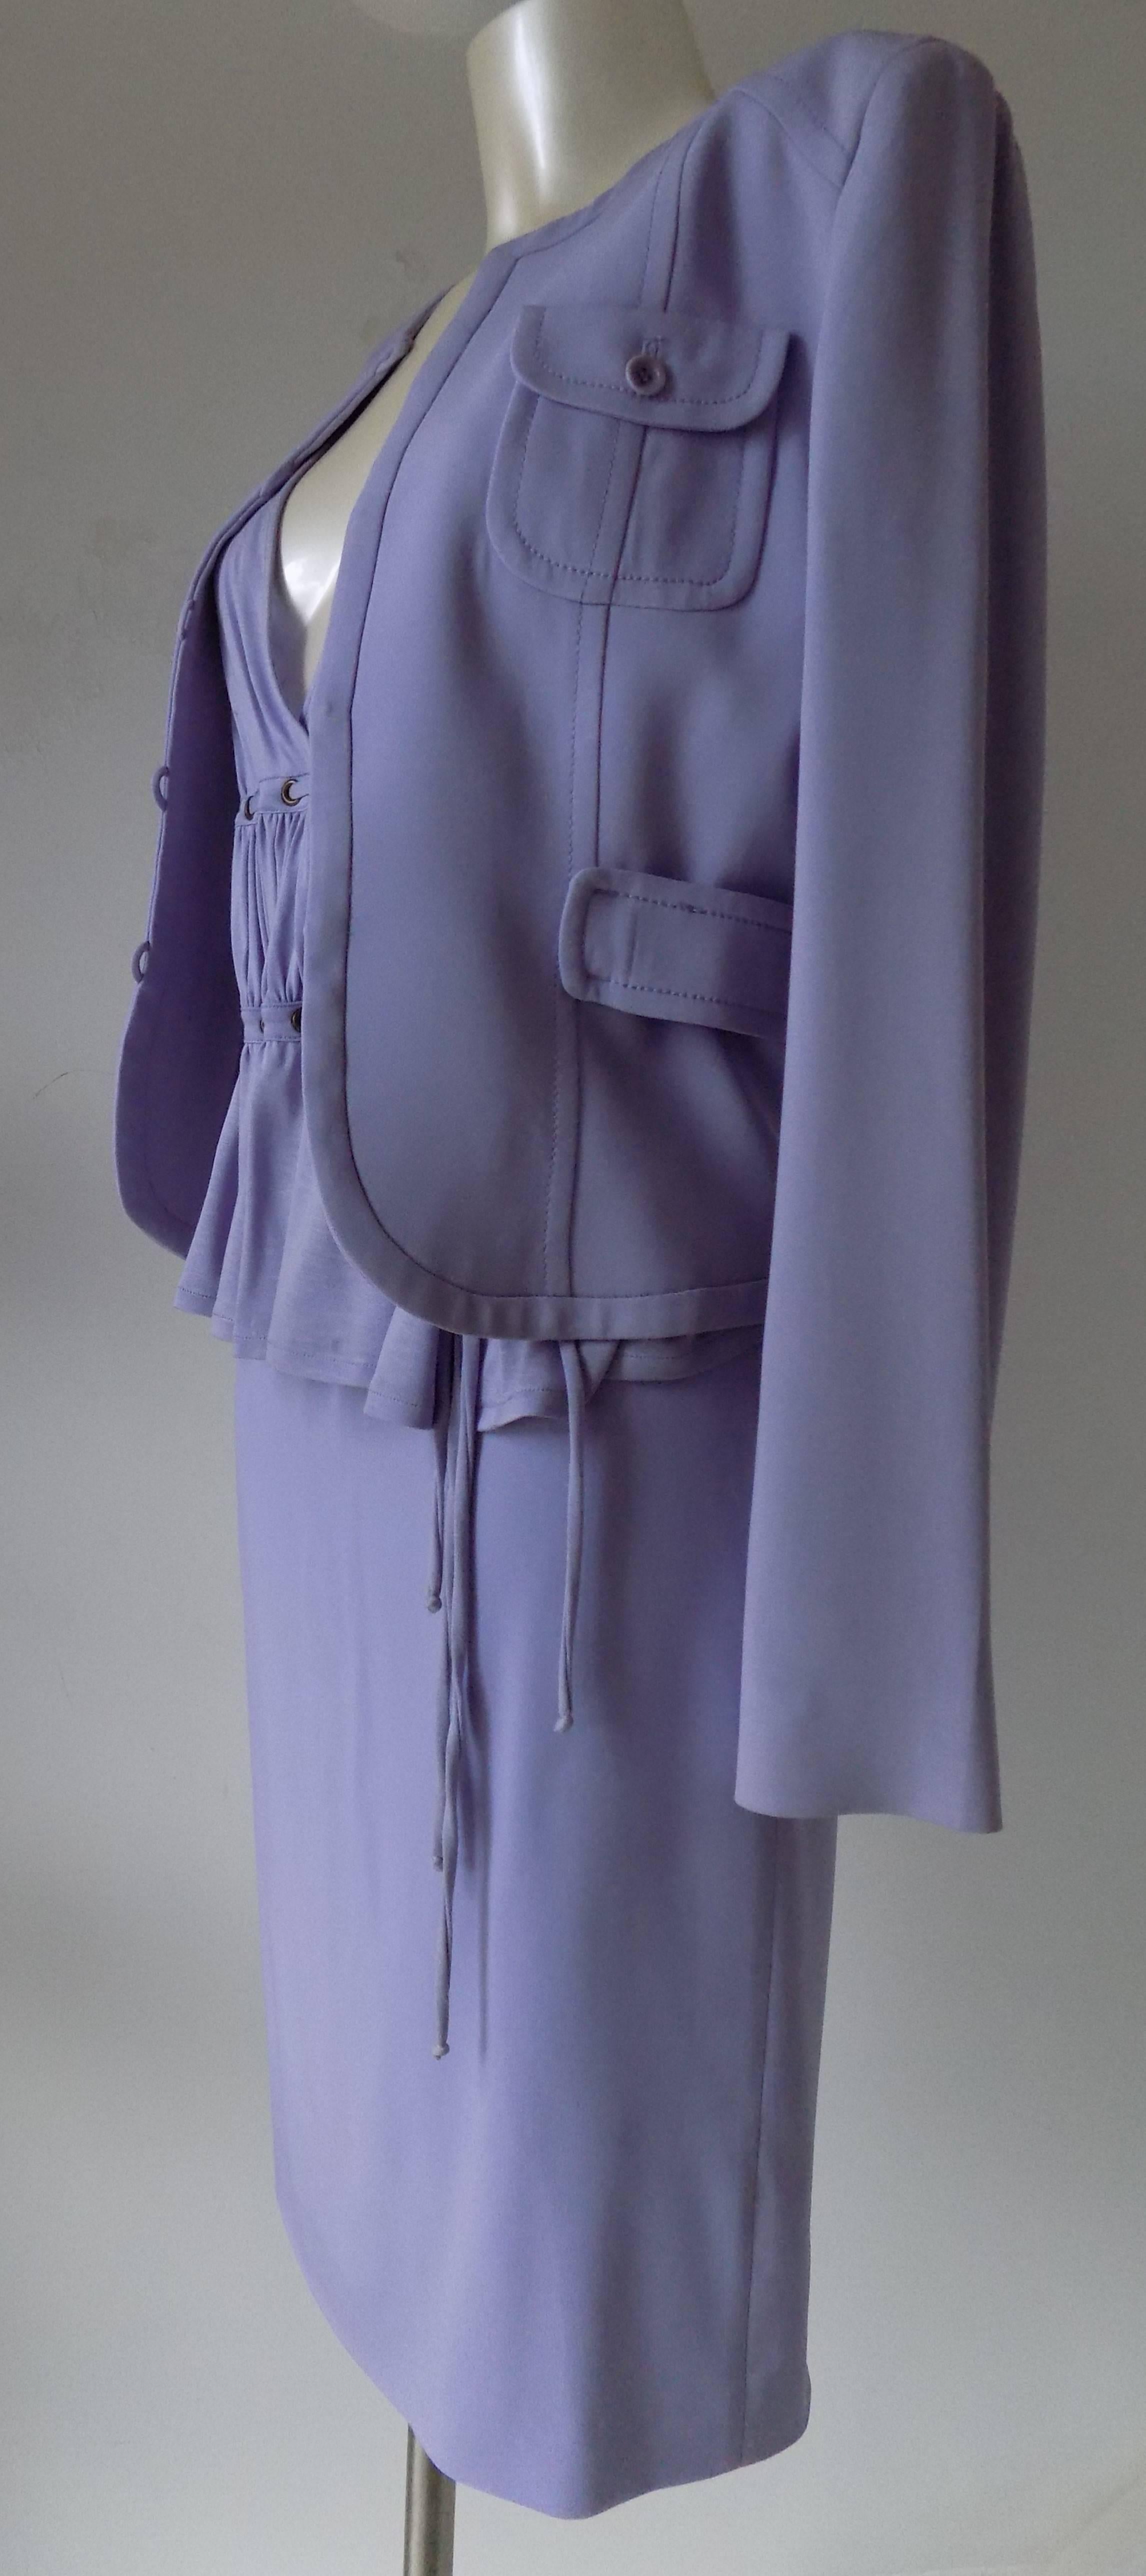 Women's 1990s Valentino violet suit and top